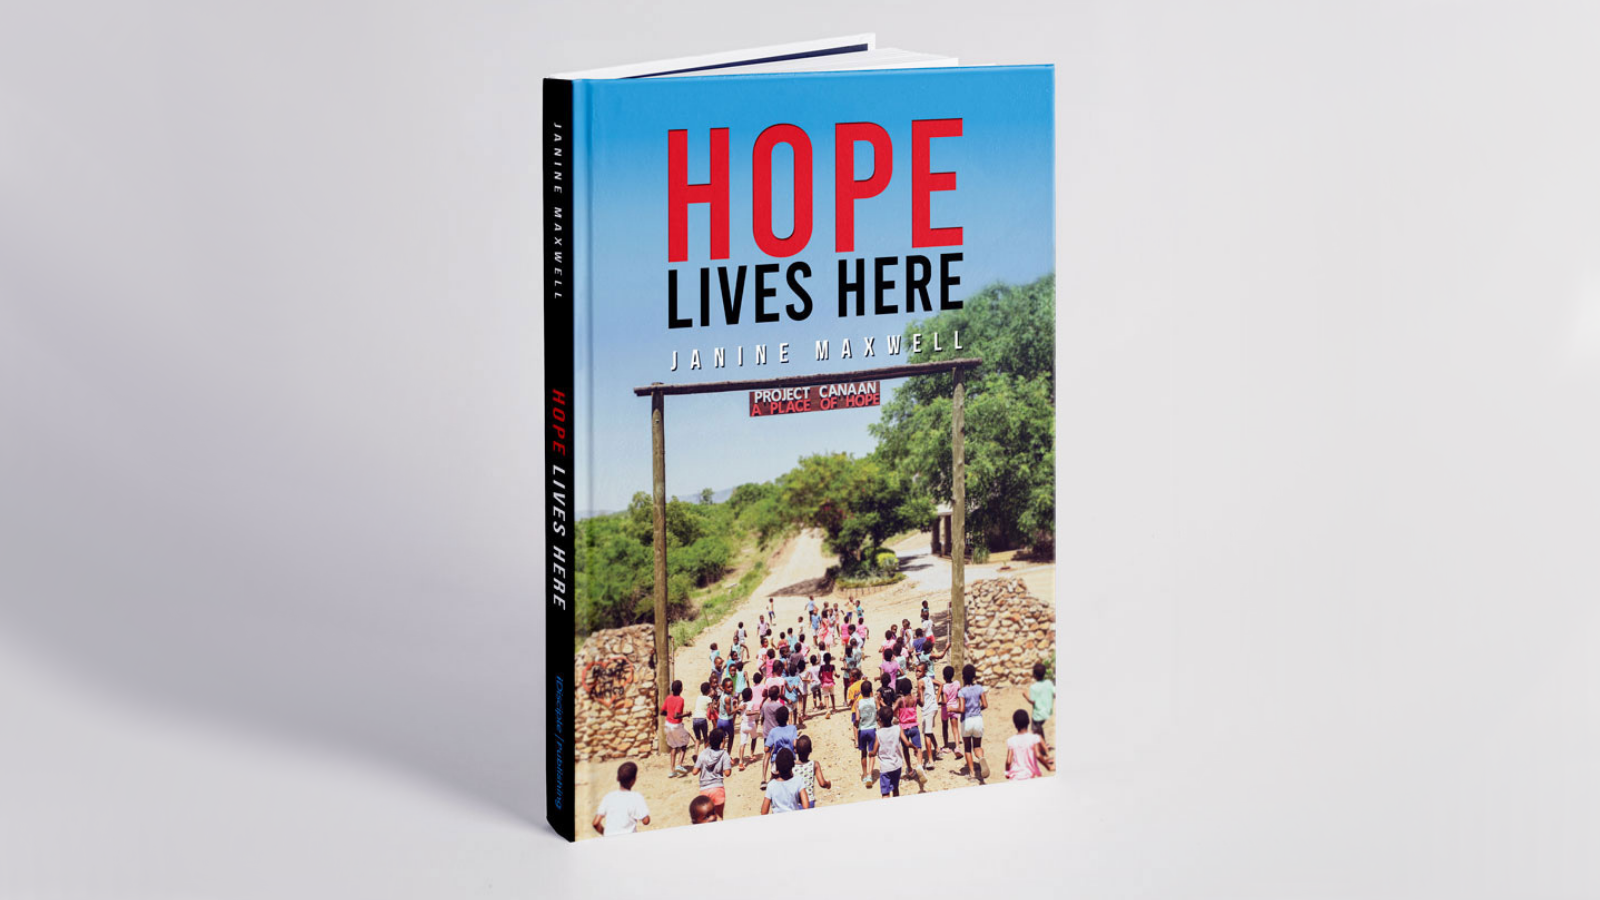 Hope Lives Here Book by Janine Maxwell